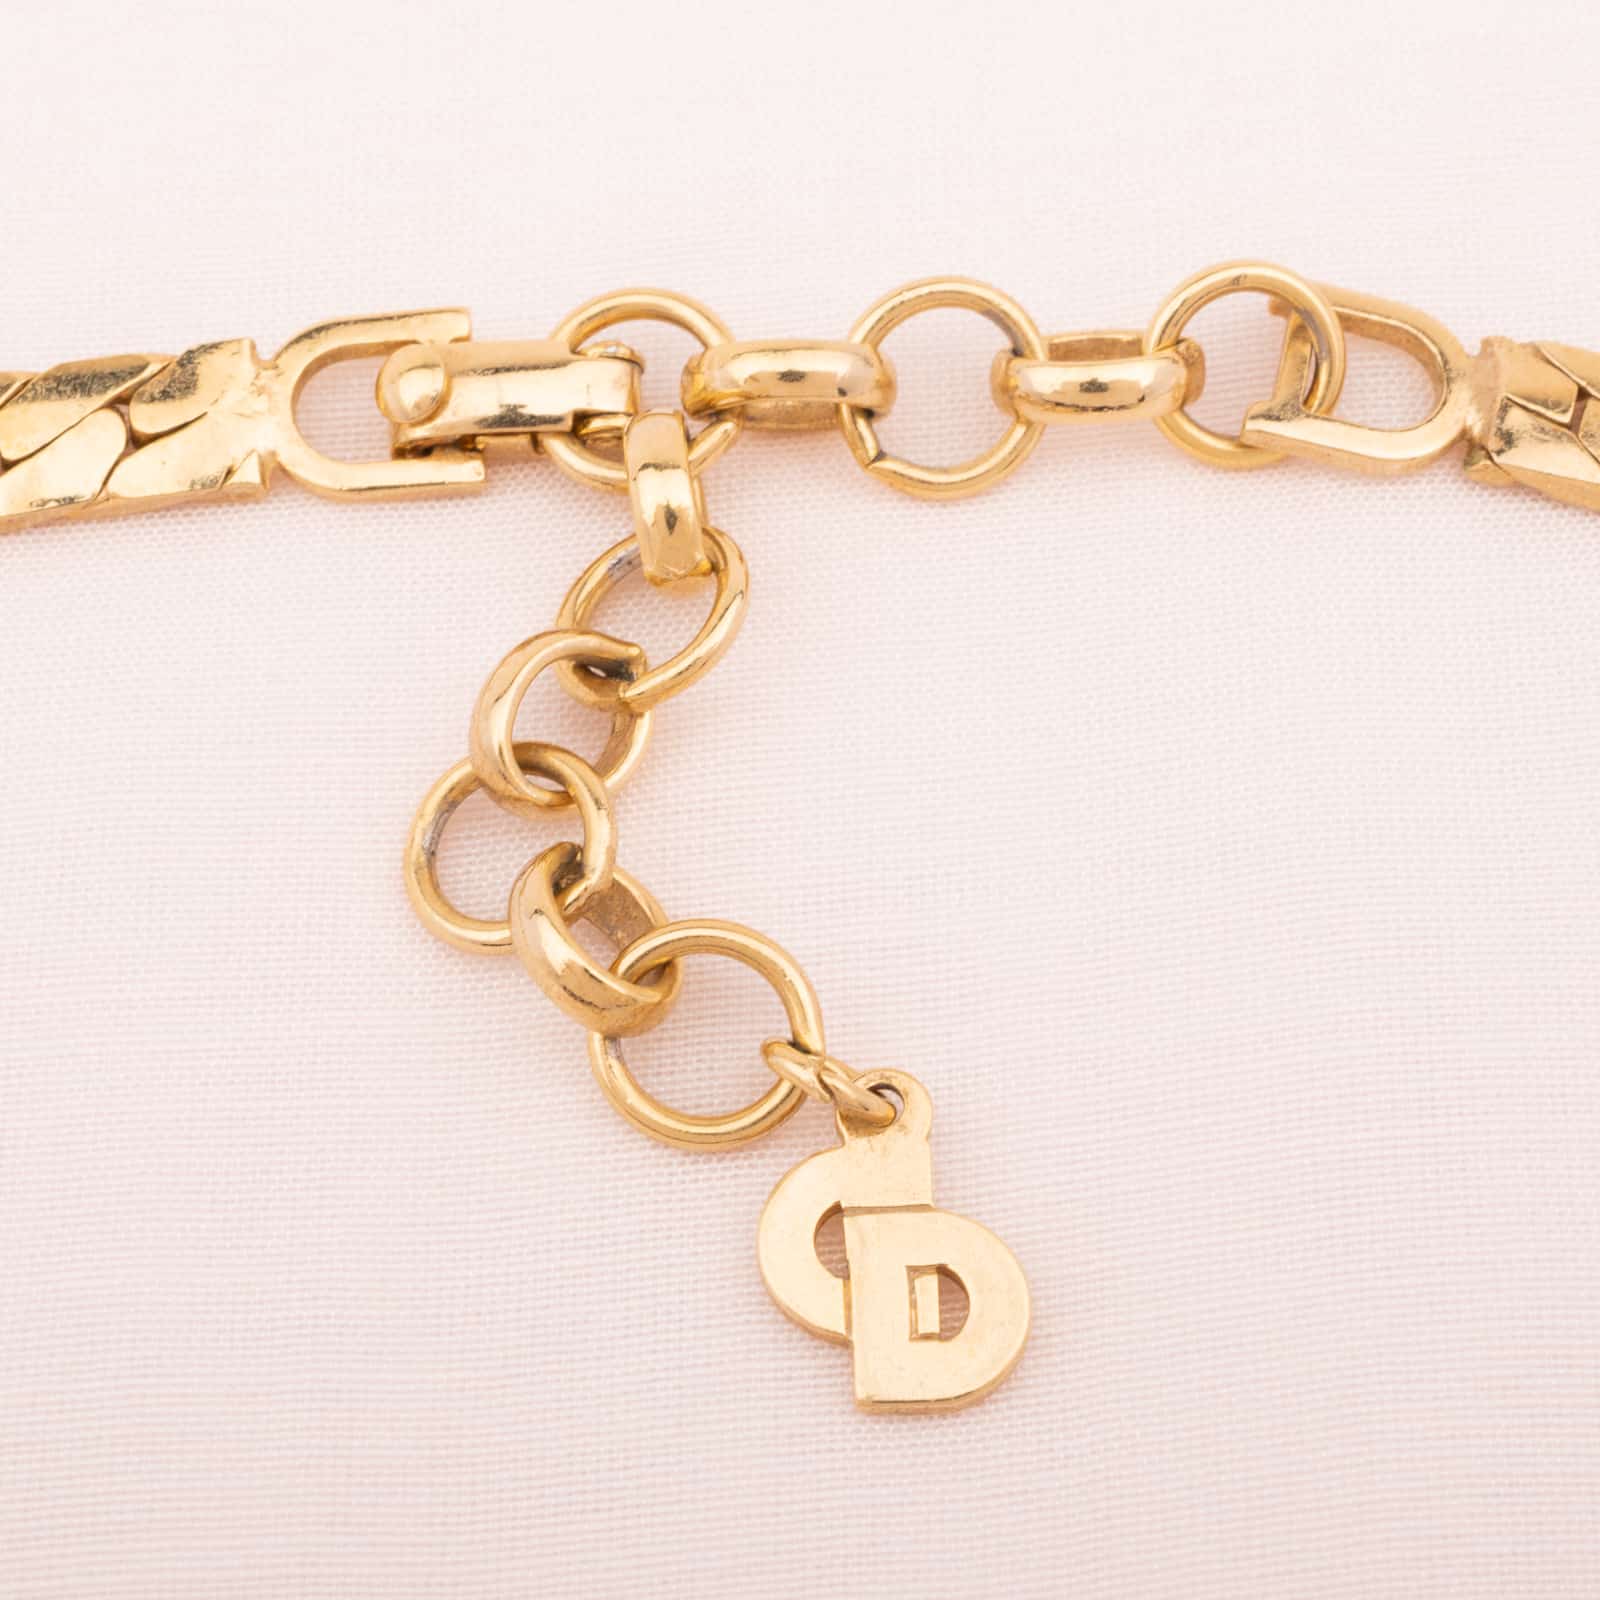 Christian Dior Gold Tone Chain Necklace Length 30 inch With Sign | eBay